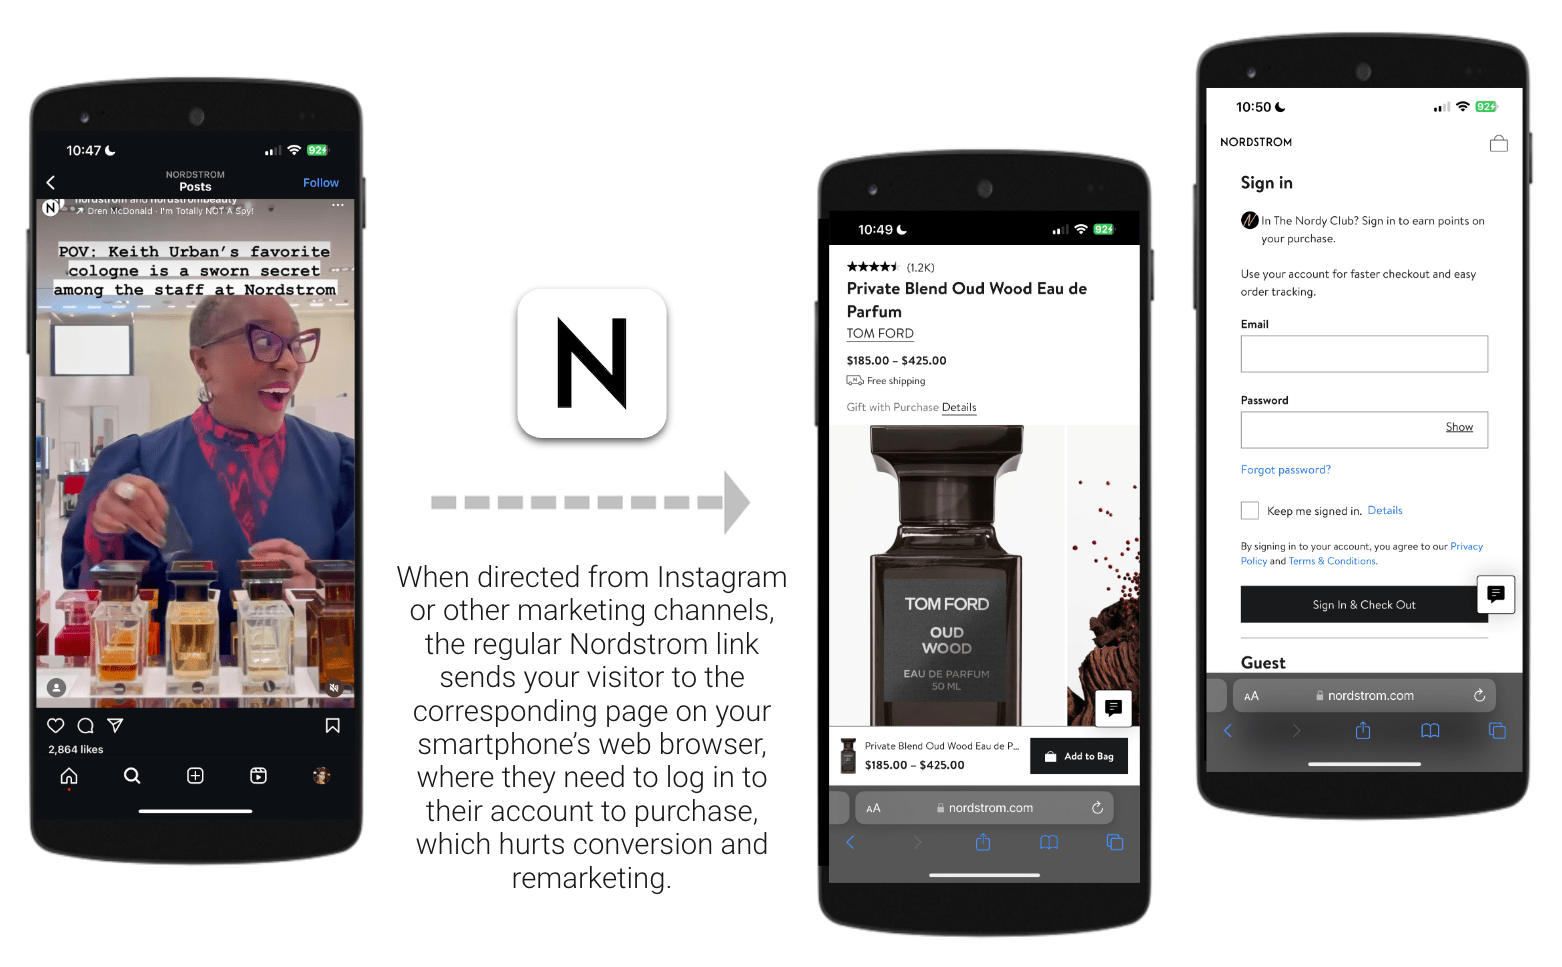 When directed from Instagram or other marketing channels, the regular Nordstrom link sends your visitor to the corresponding page on your smartphone's web browser, where they need to log in to their account to purchase, which hurts conversion and remarketing. 